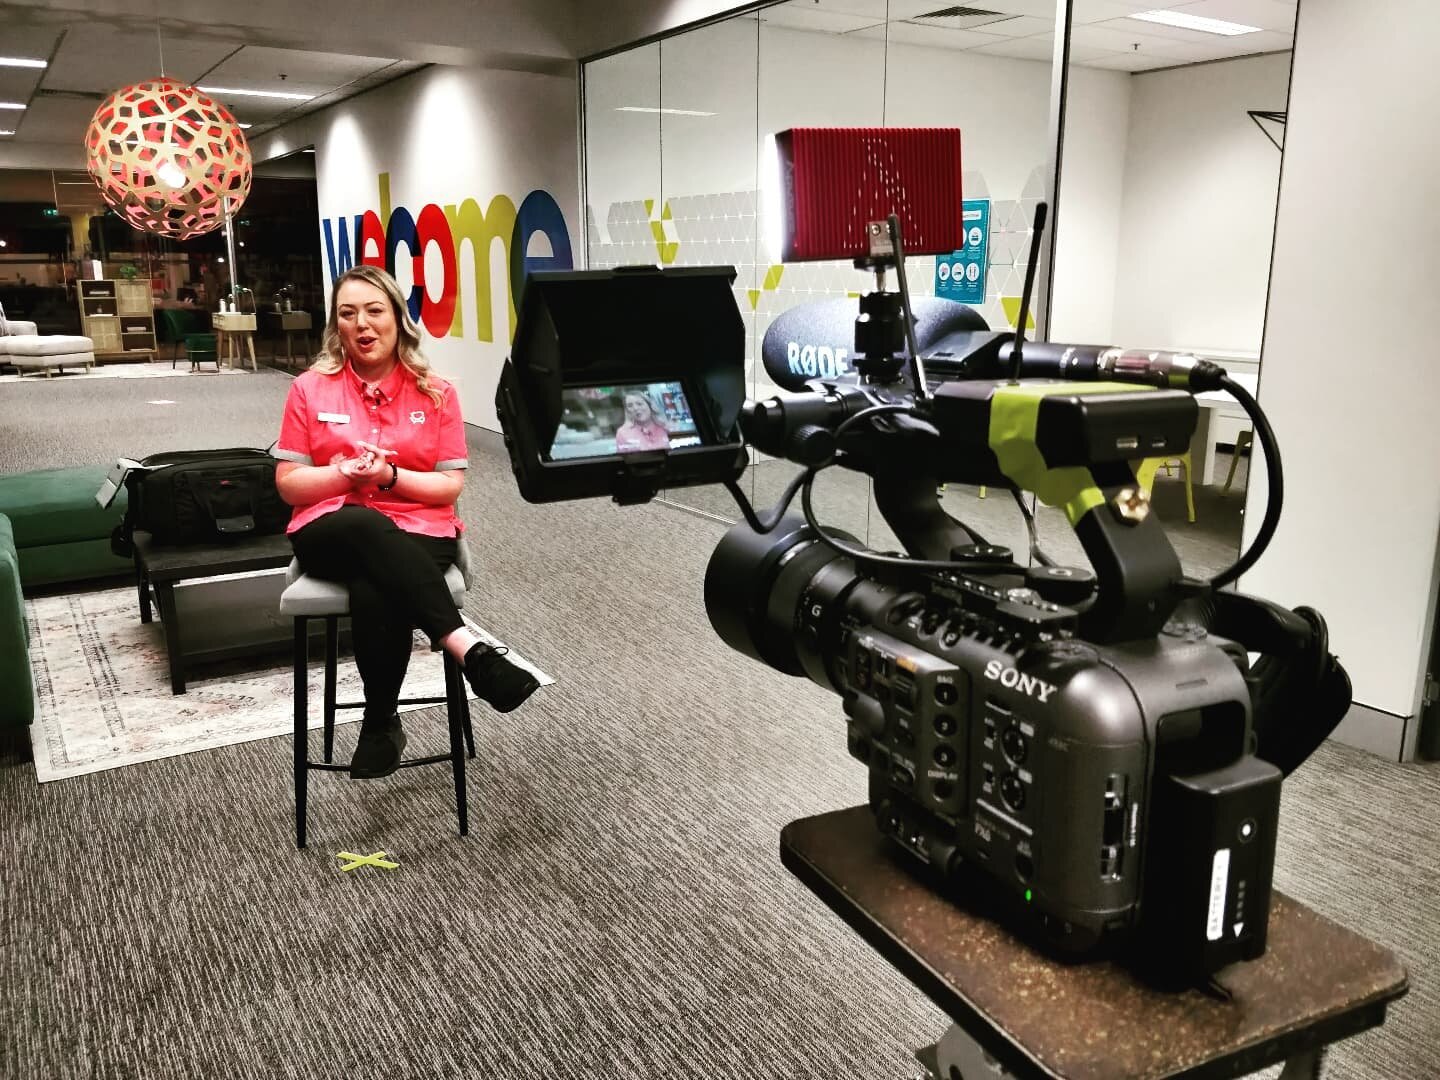 Traveling throughout NSW you meet some interesting people. Here we're shooting Rhiannon at Fantastic furniture and learning about her career in the retail sector. The segment was shot as a part of the Skillsone: Skills and Thrills showcase. If you'd 